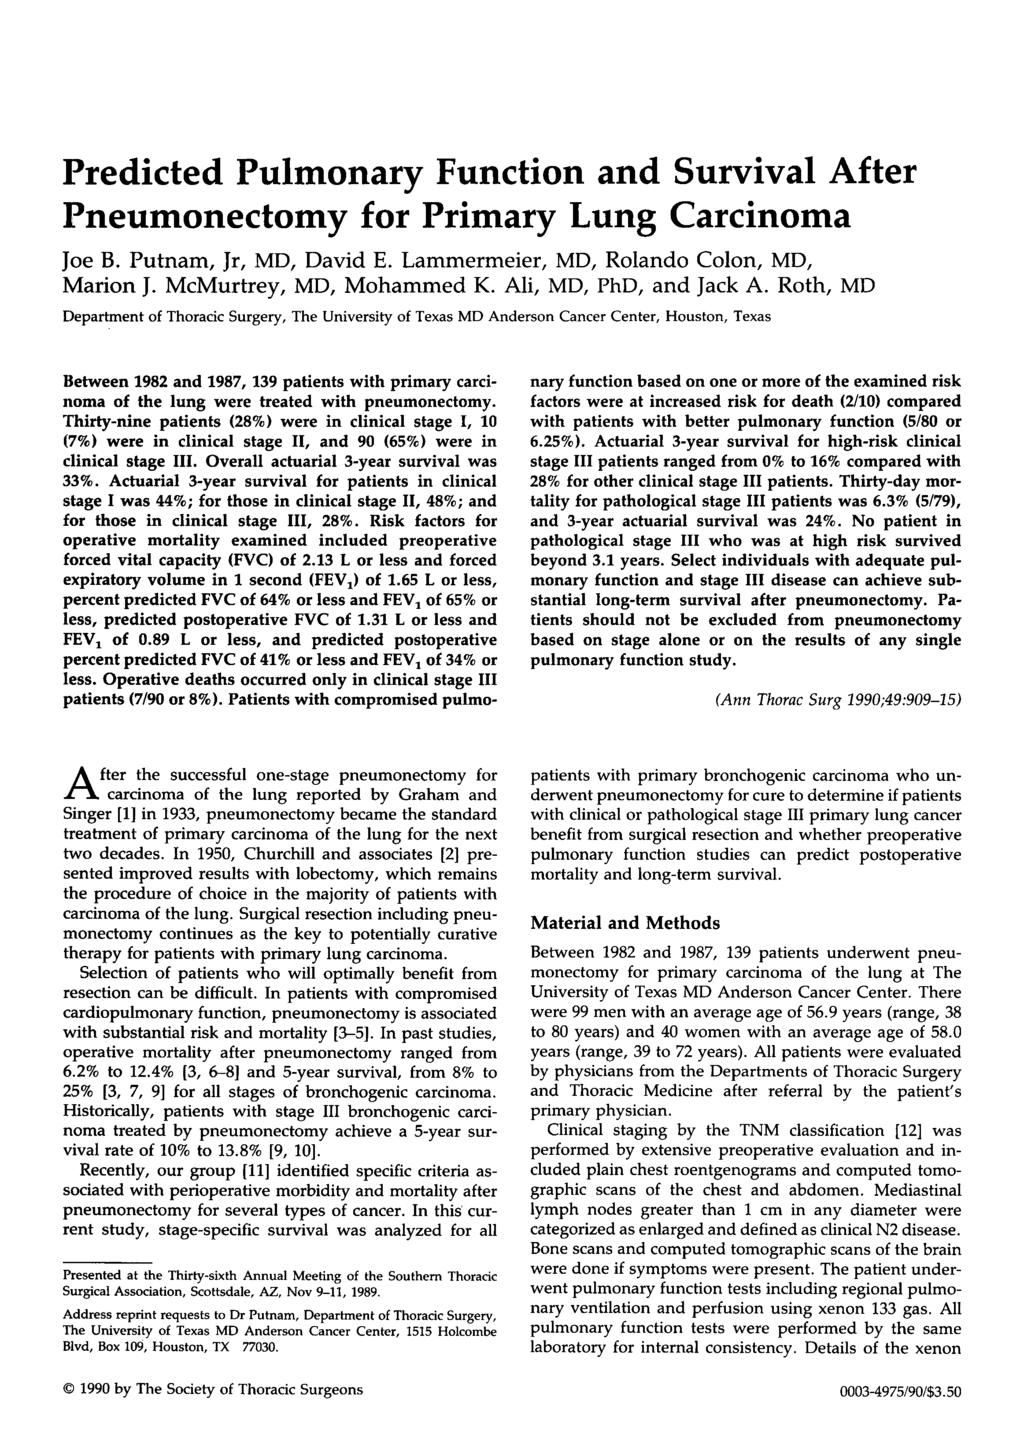 Predicted Pulmonary Function and Survival After Pneumonectomy for Primary Lung Carcinoma Joe B. Putnam, Jr, MD, David E. Lammermeier, MD, Rolando Colon, MD, Marion J. McMurtrey, MD, Mohammed K.